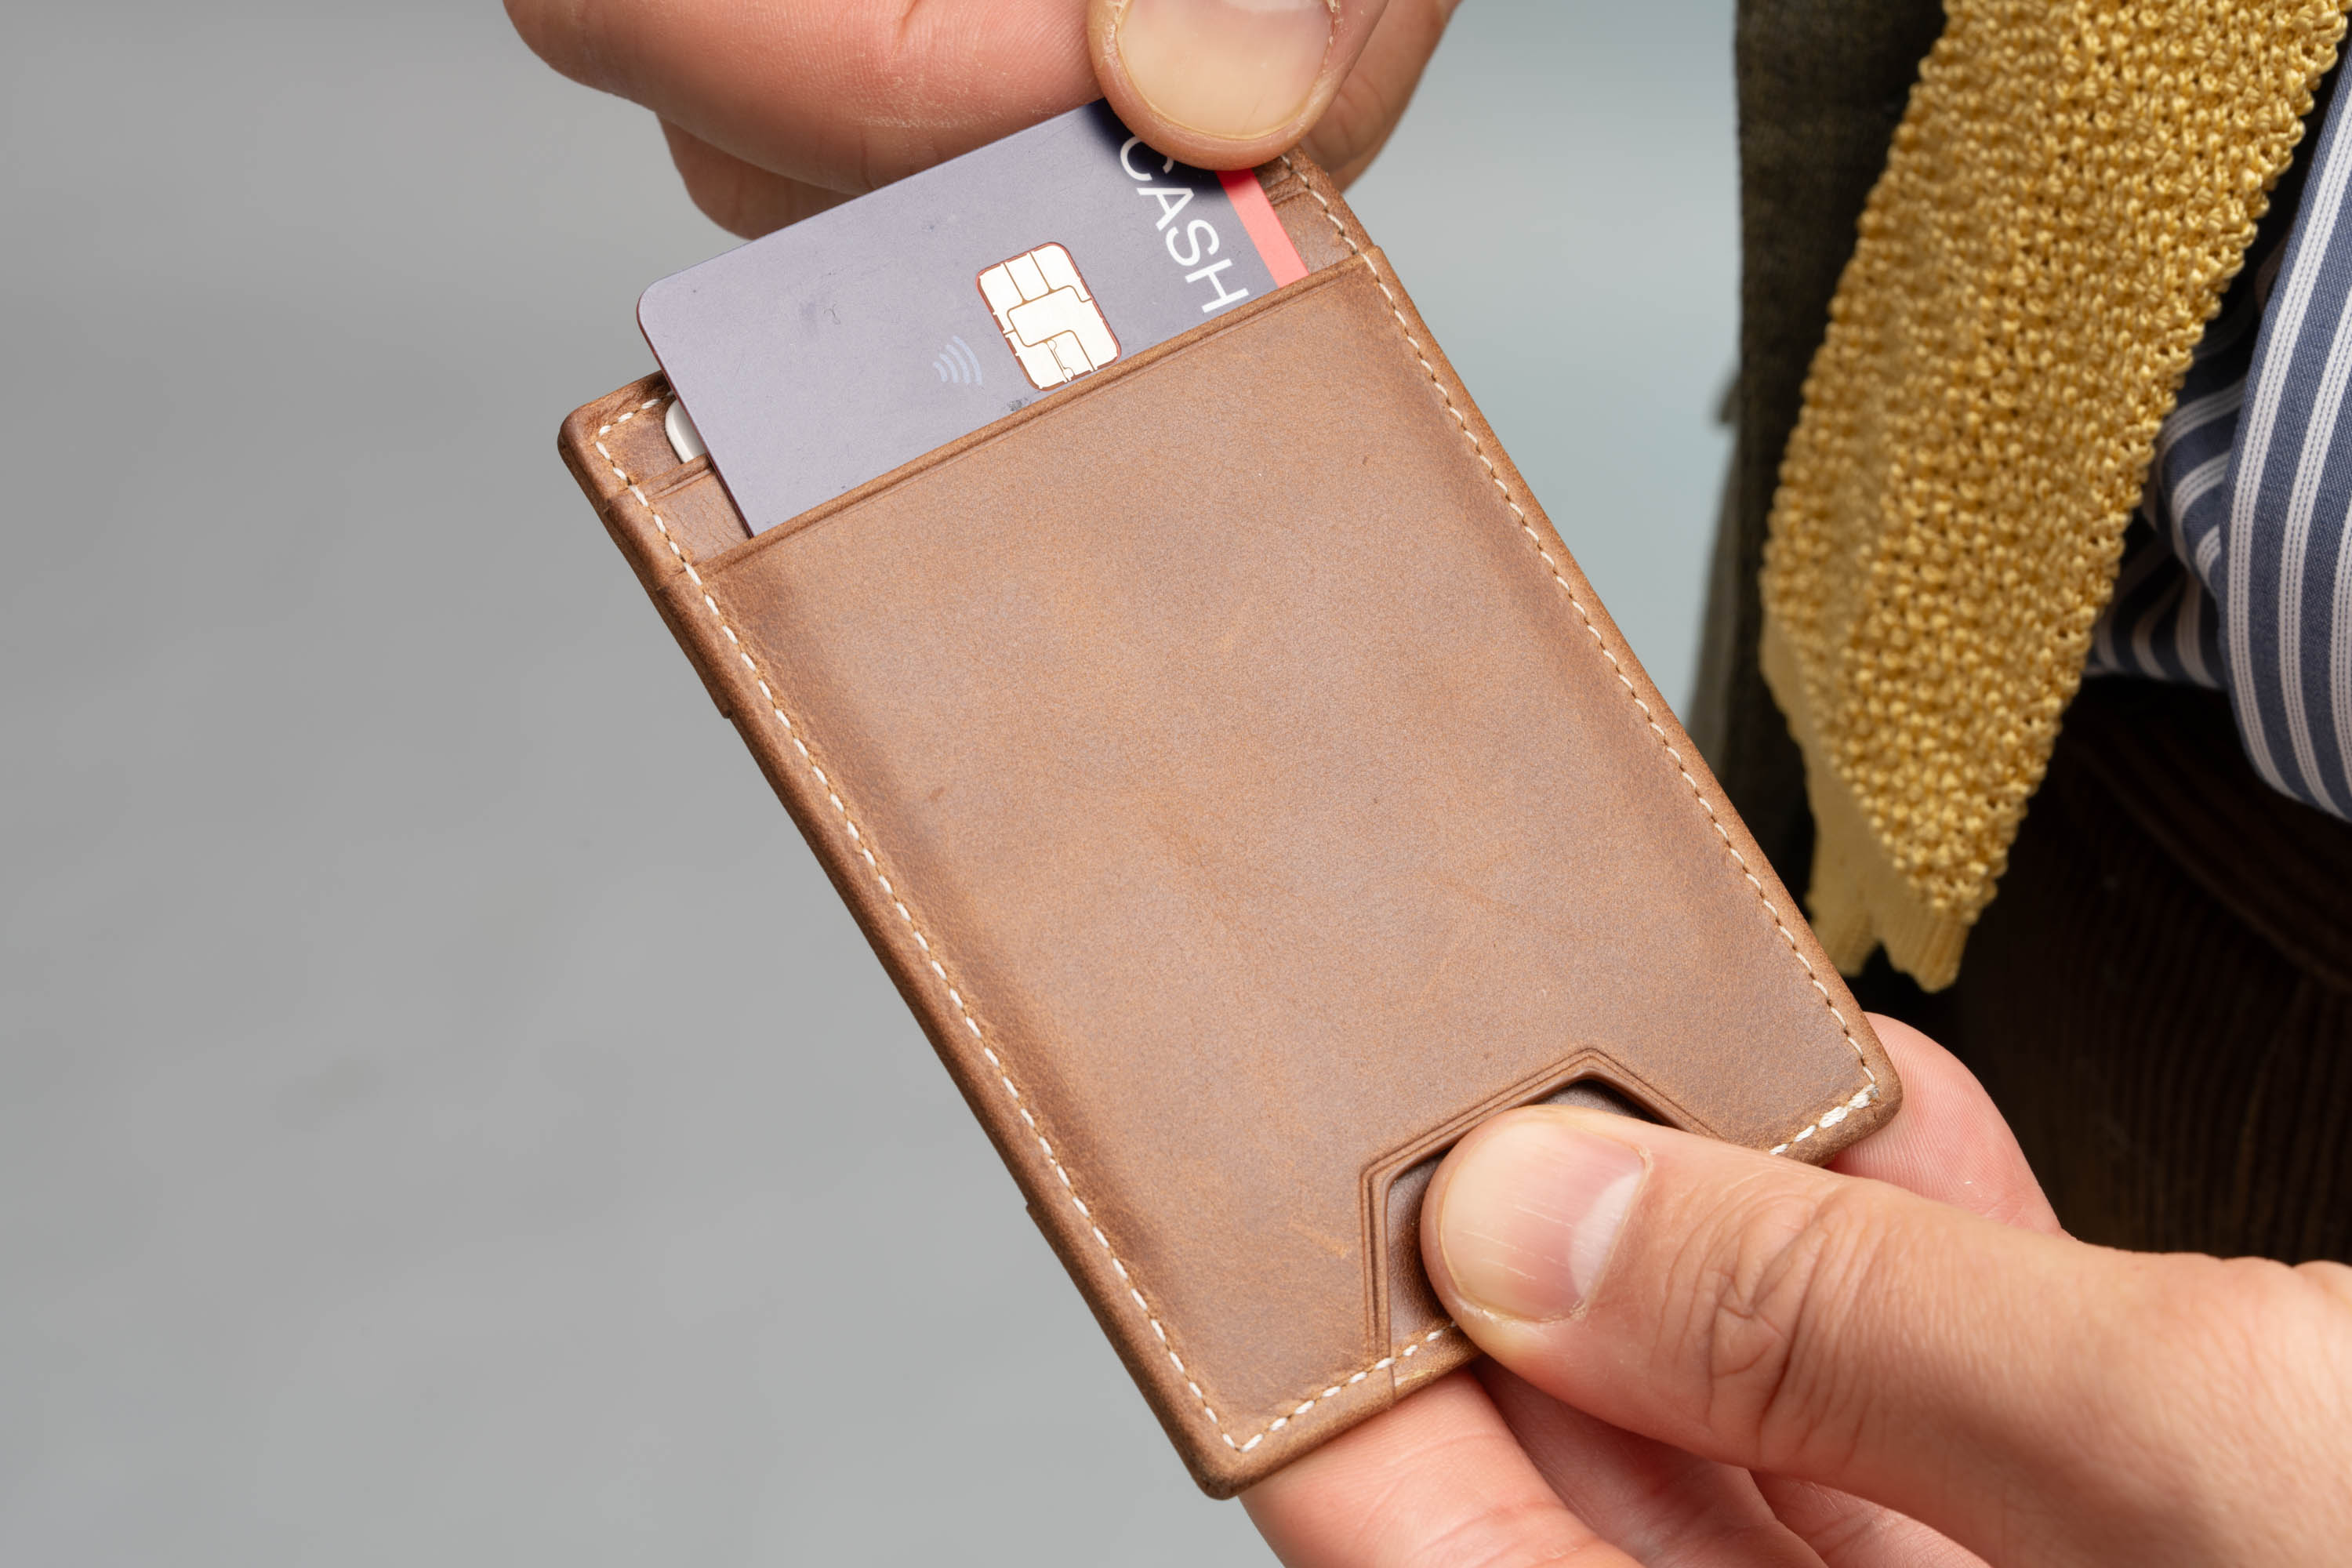 Four Card Carrier Slim Wallet in Saddle Brown Montecristo Leather comes with an RFID blocking feature. 